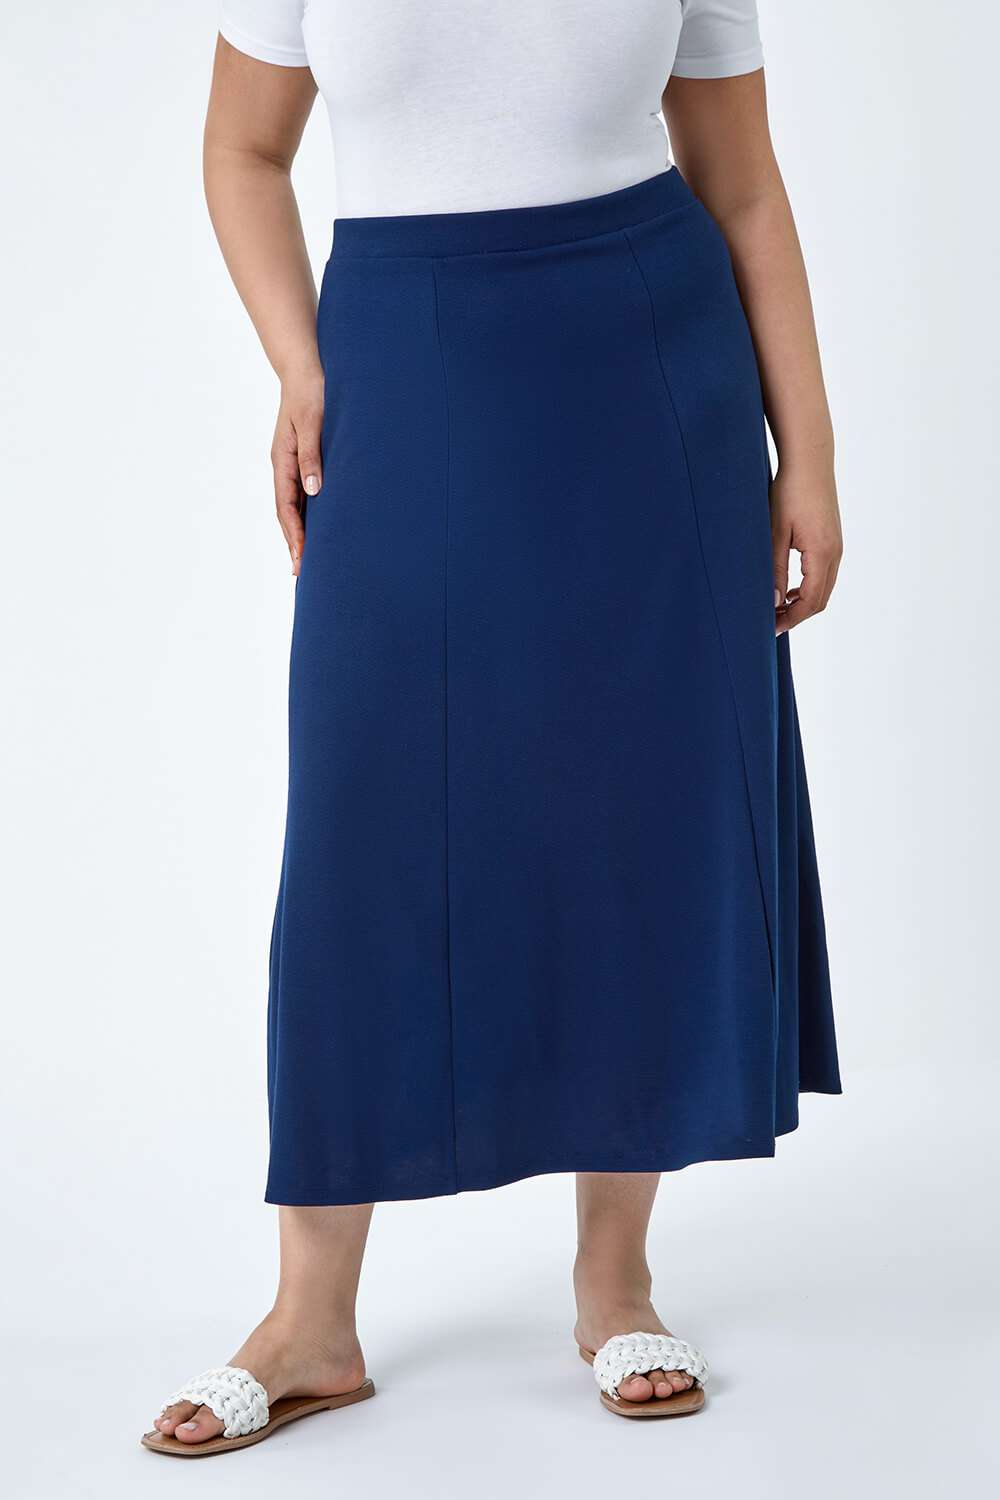 Navy  Curve Flared Midi Stretch Skirt, Image 4 of 5